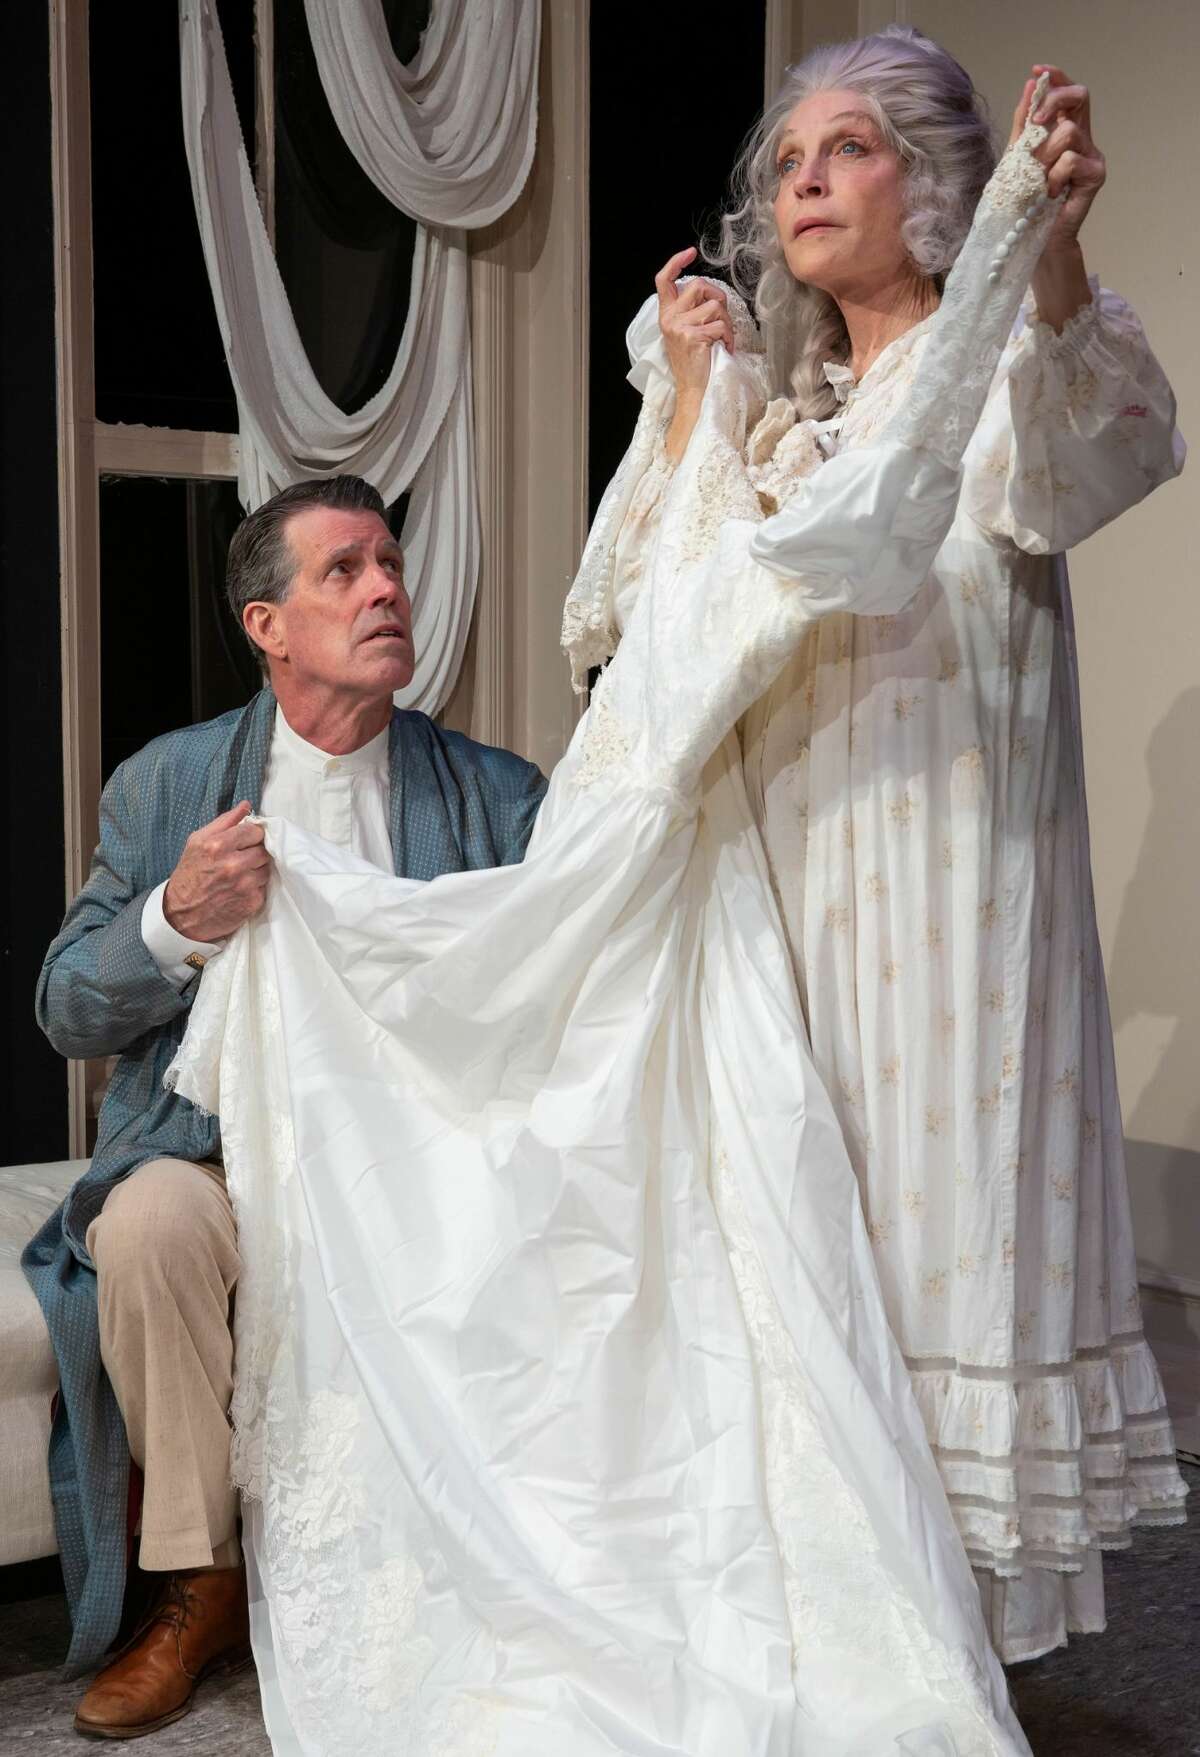 Steven Patterson as James Tyrone and Roxanne Fay as his wife, Mary, in "Long Day Journey into Night," running through  Nov. 22 at Bridge Street Theatre in Catskill.